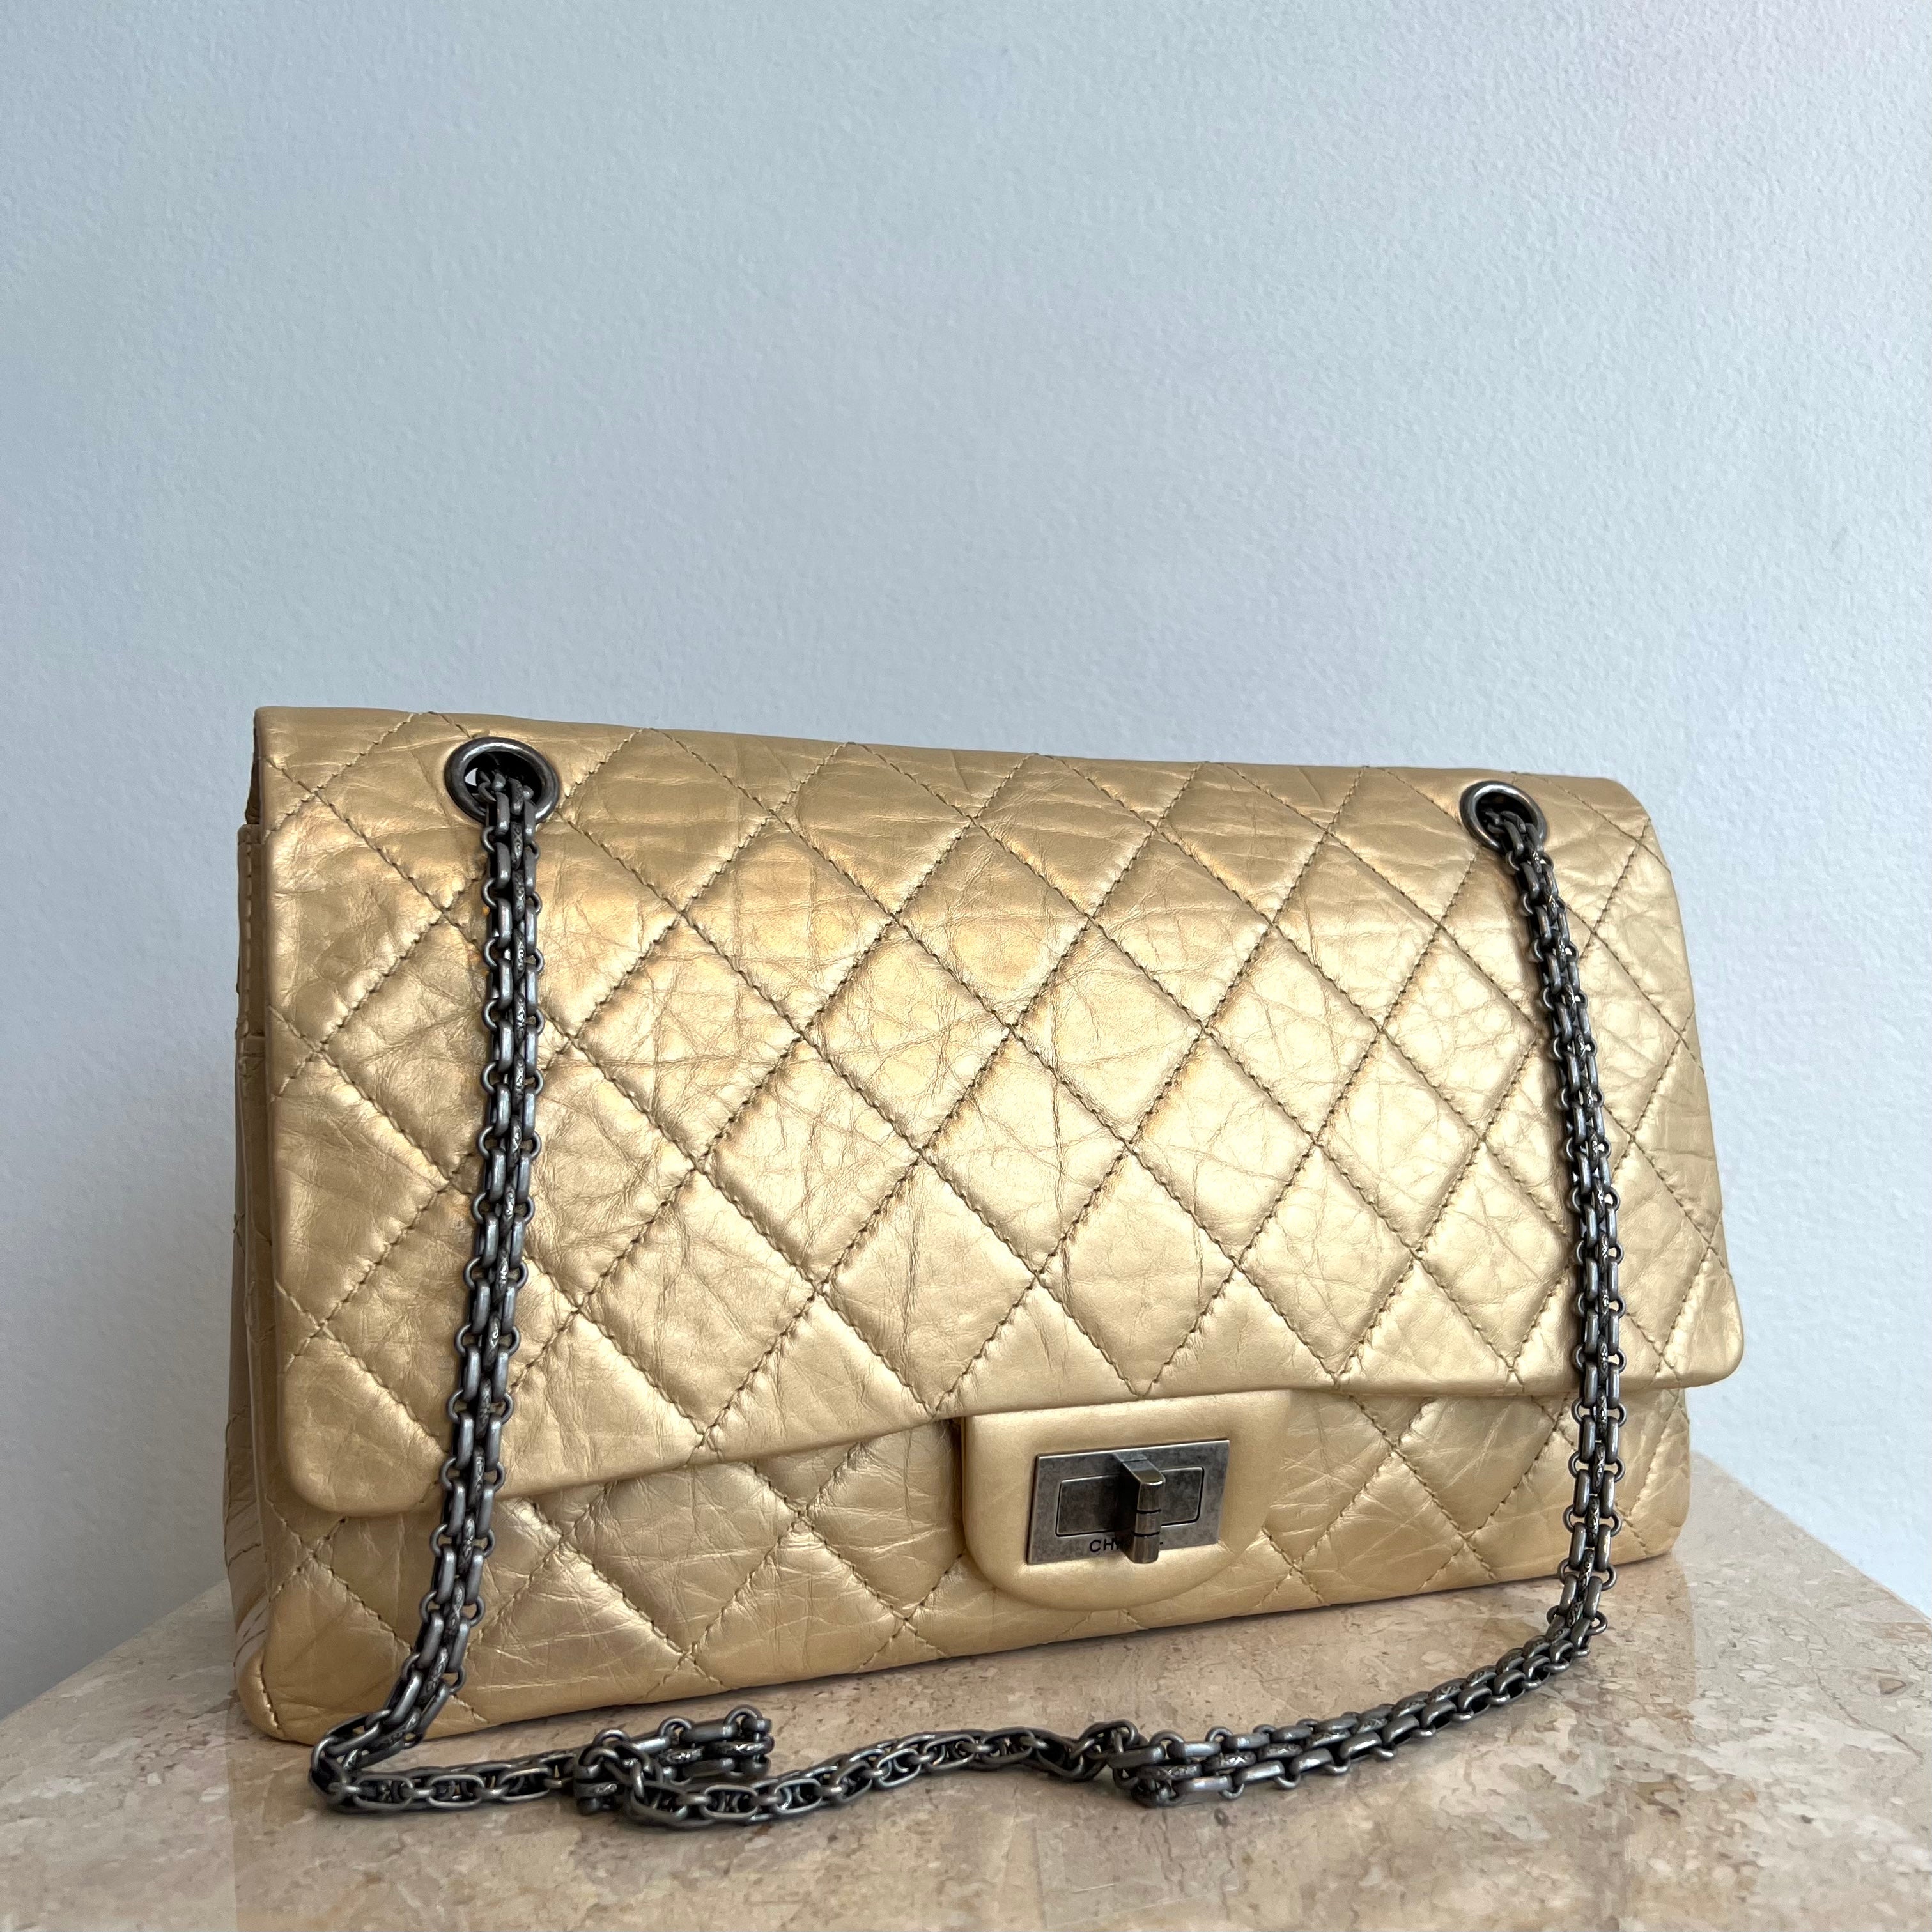 Chanel Metallic Gold Grained Calfskin Mini Flap With Top Handle